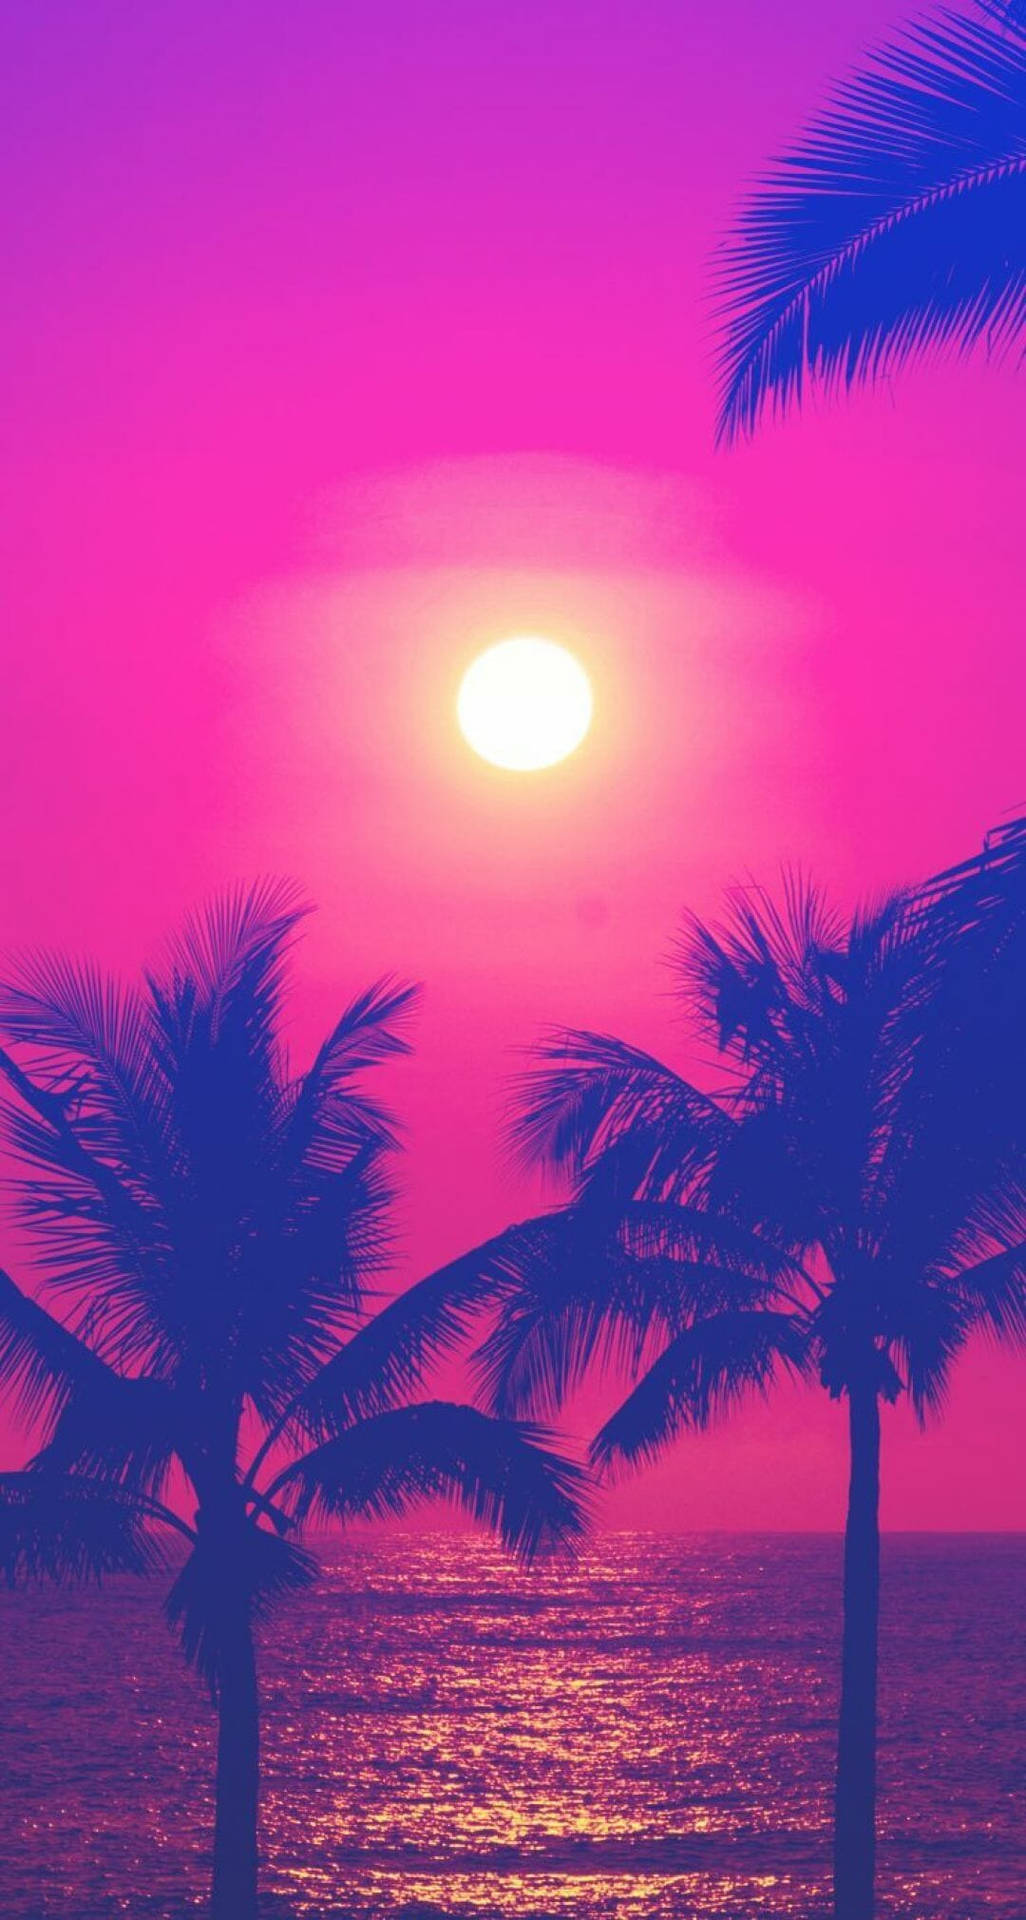 Enjoy the Perfectly Pink Sunset Wallpaper